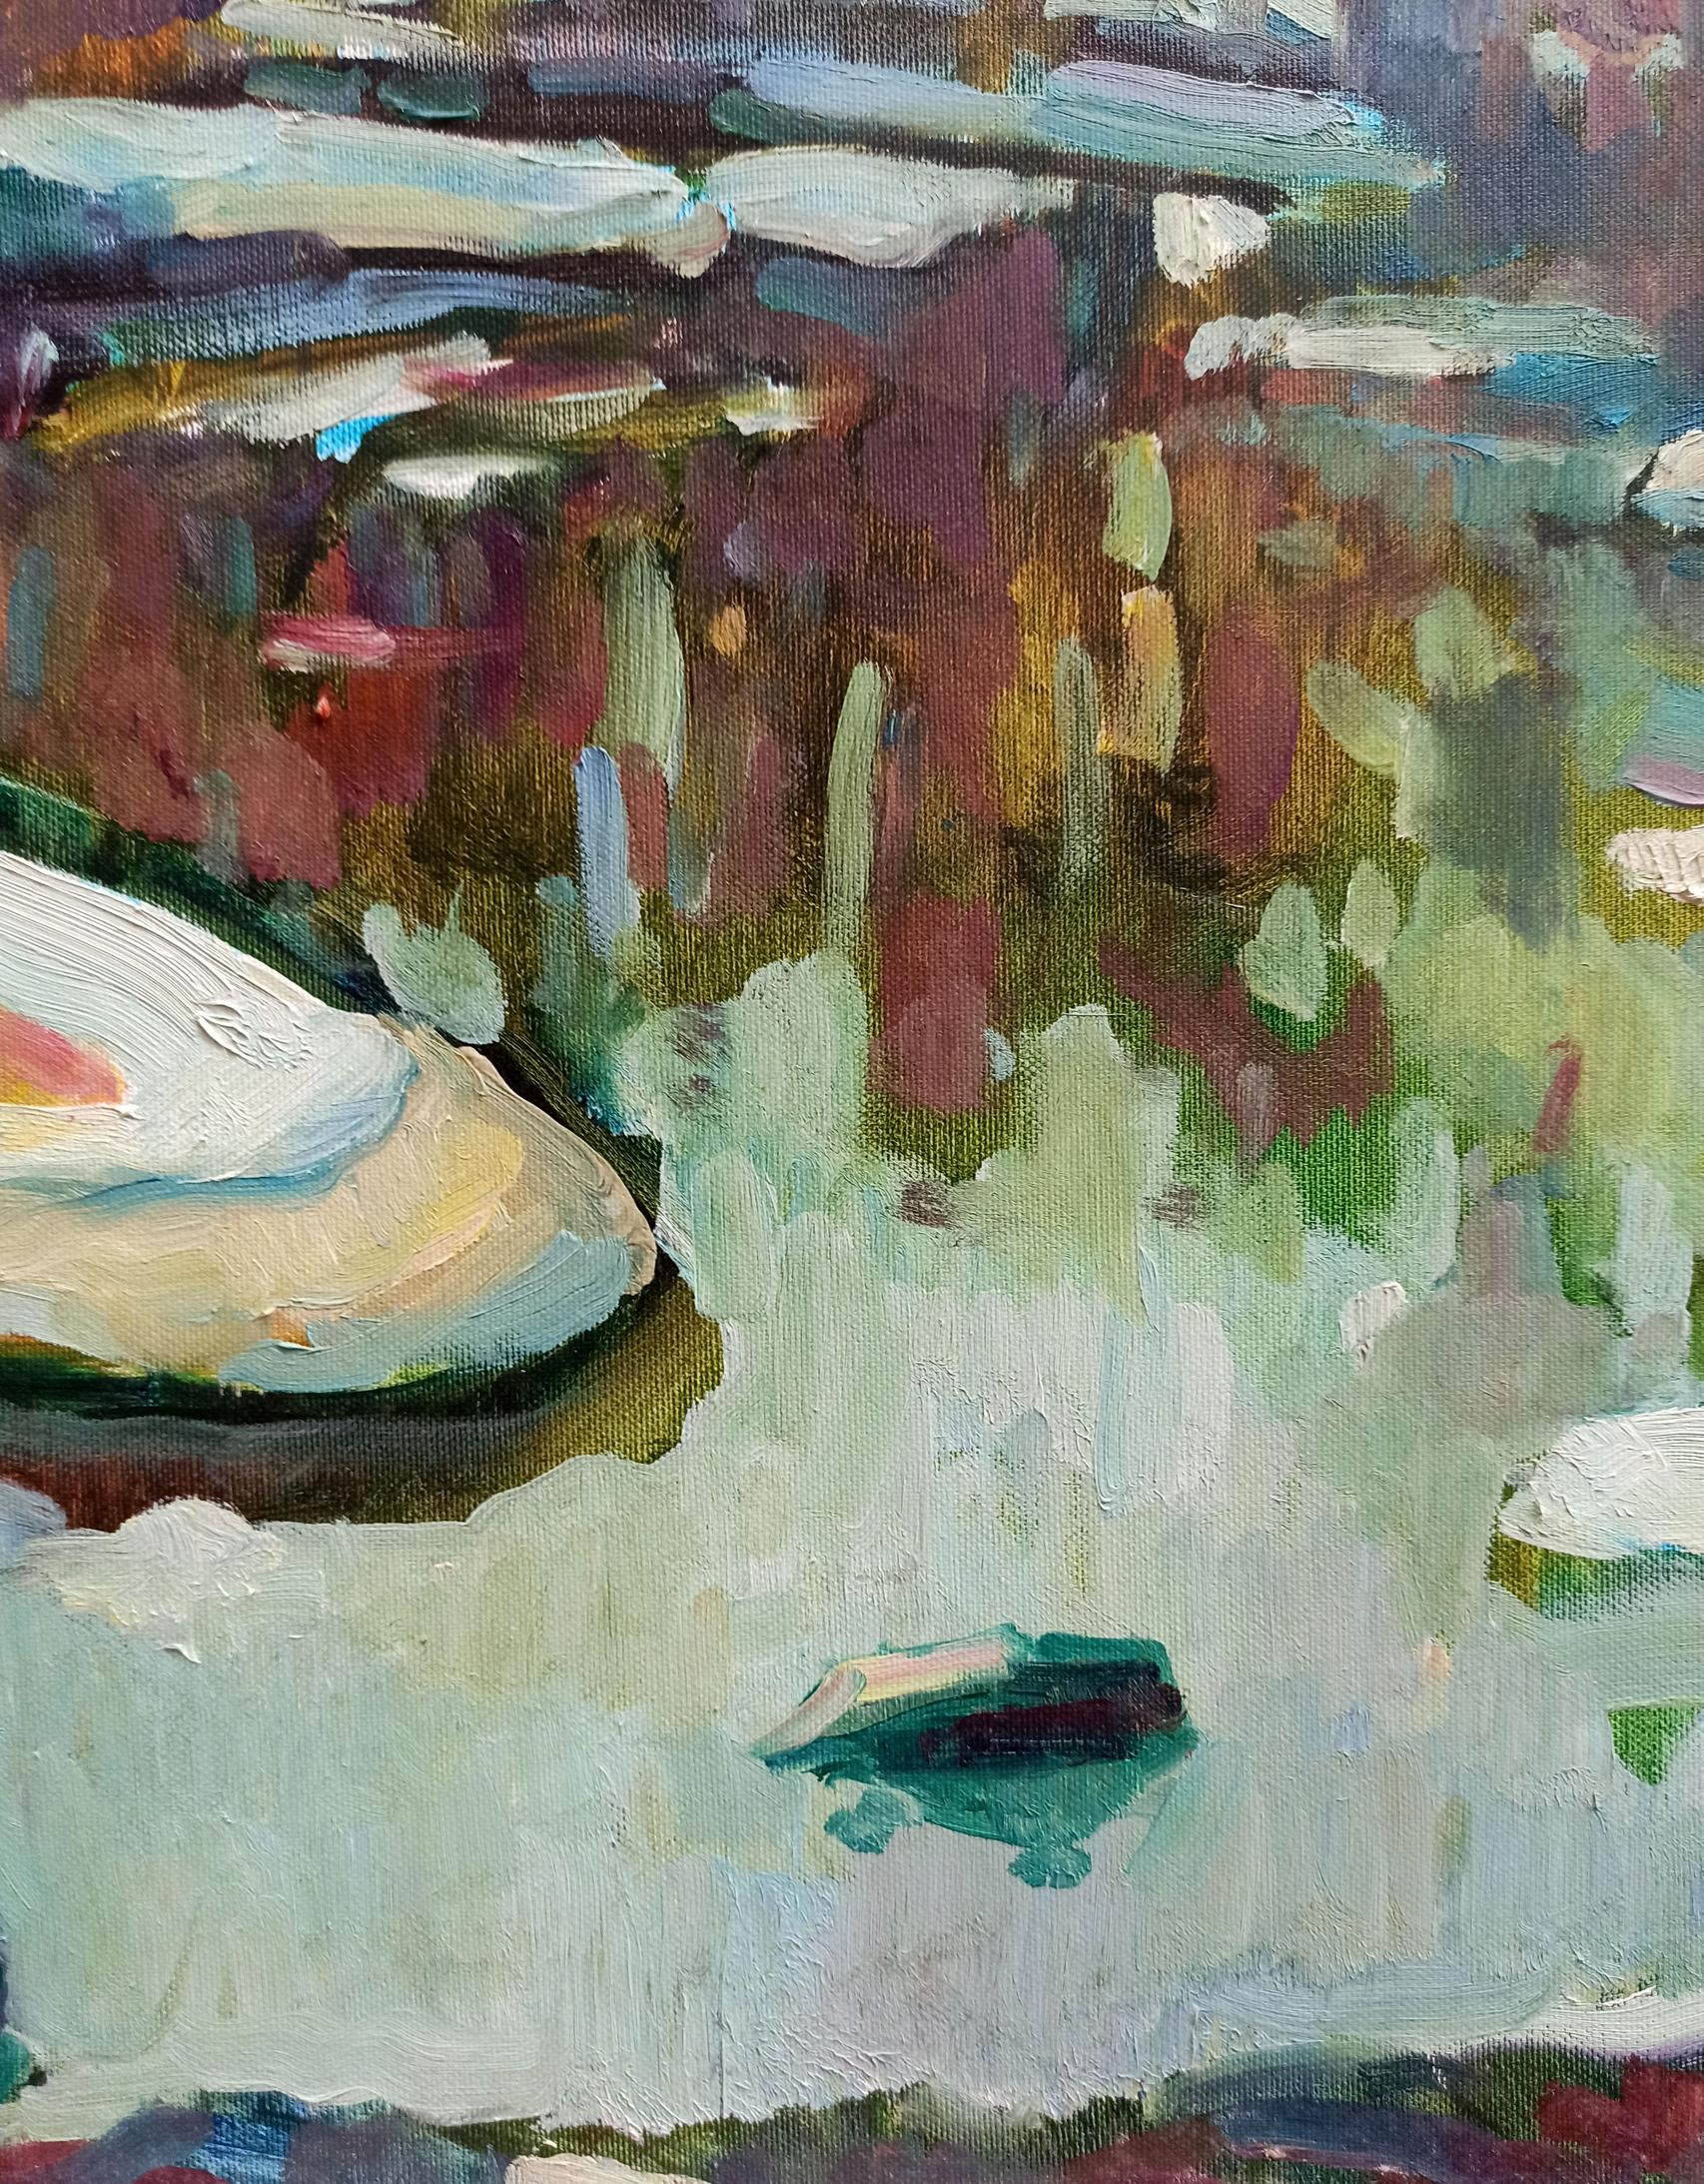 Peter Dobrev's oil painting invites viewers to experience the joys of spring